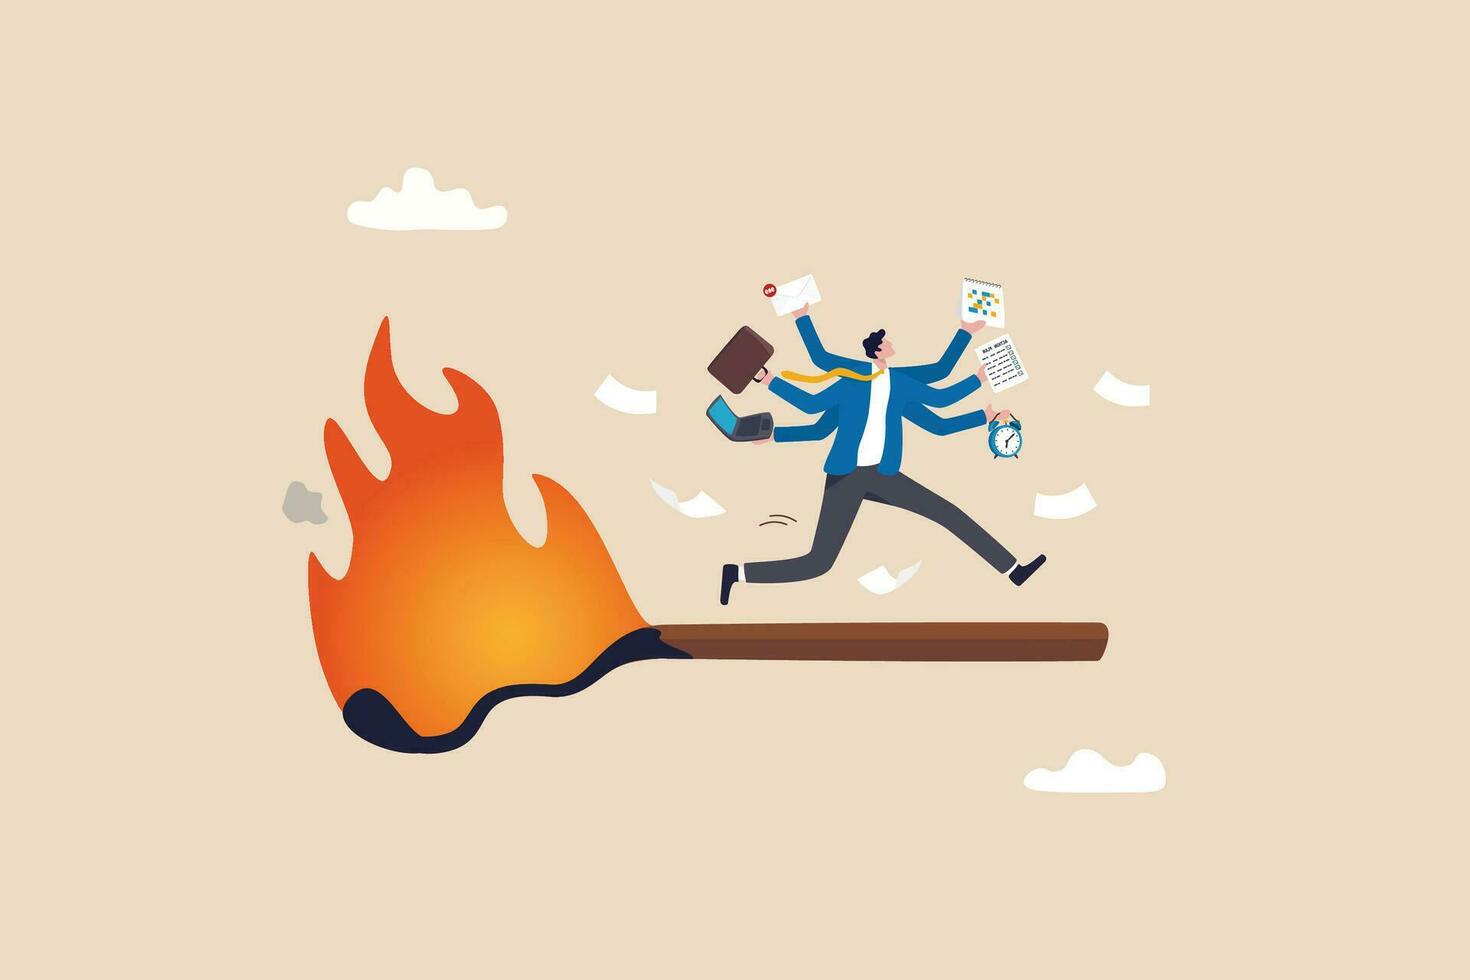 Toxic productivity, panic or burnout employee, overworked to finish work within timeline, hurry to complete multitasking or urgent work schedule concept, productive businessman on burning matchstick. vector